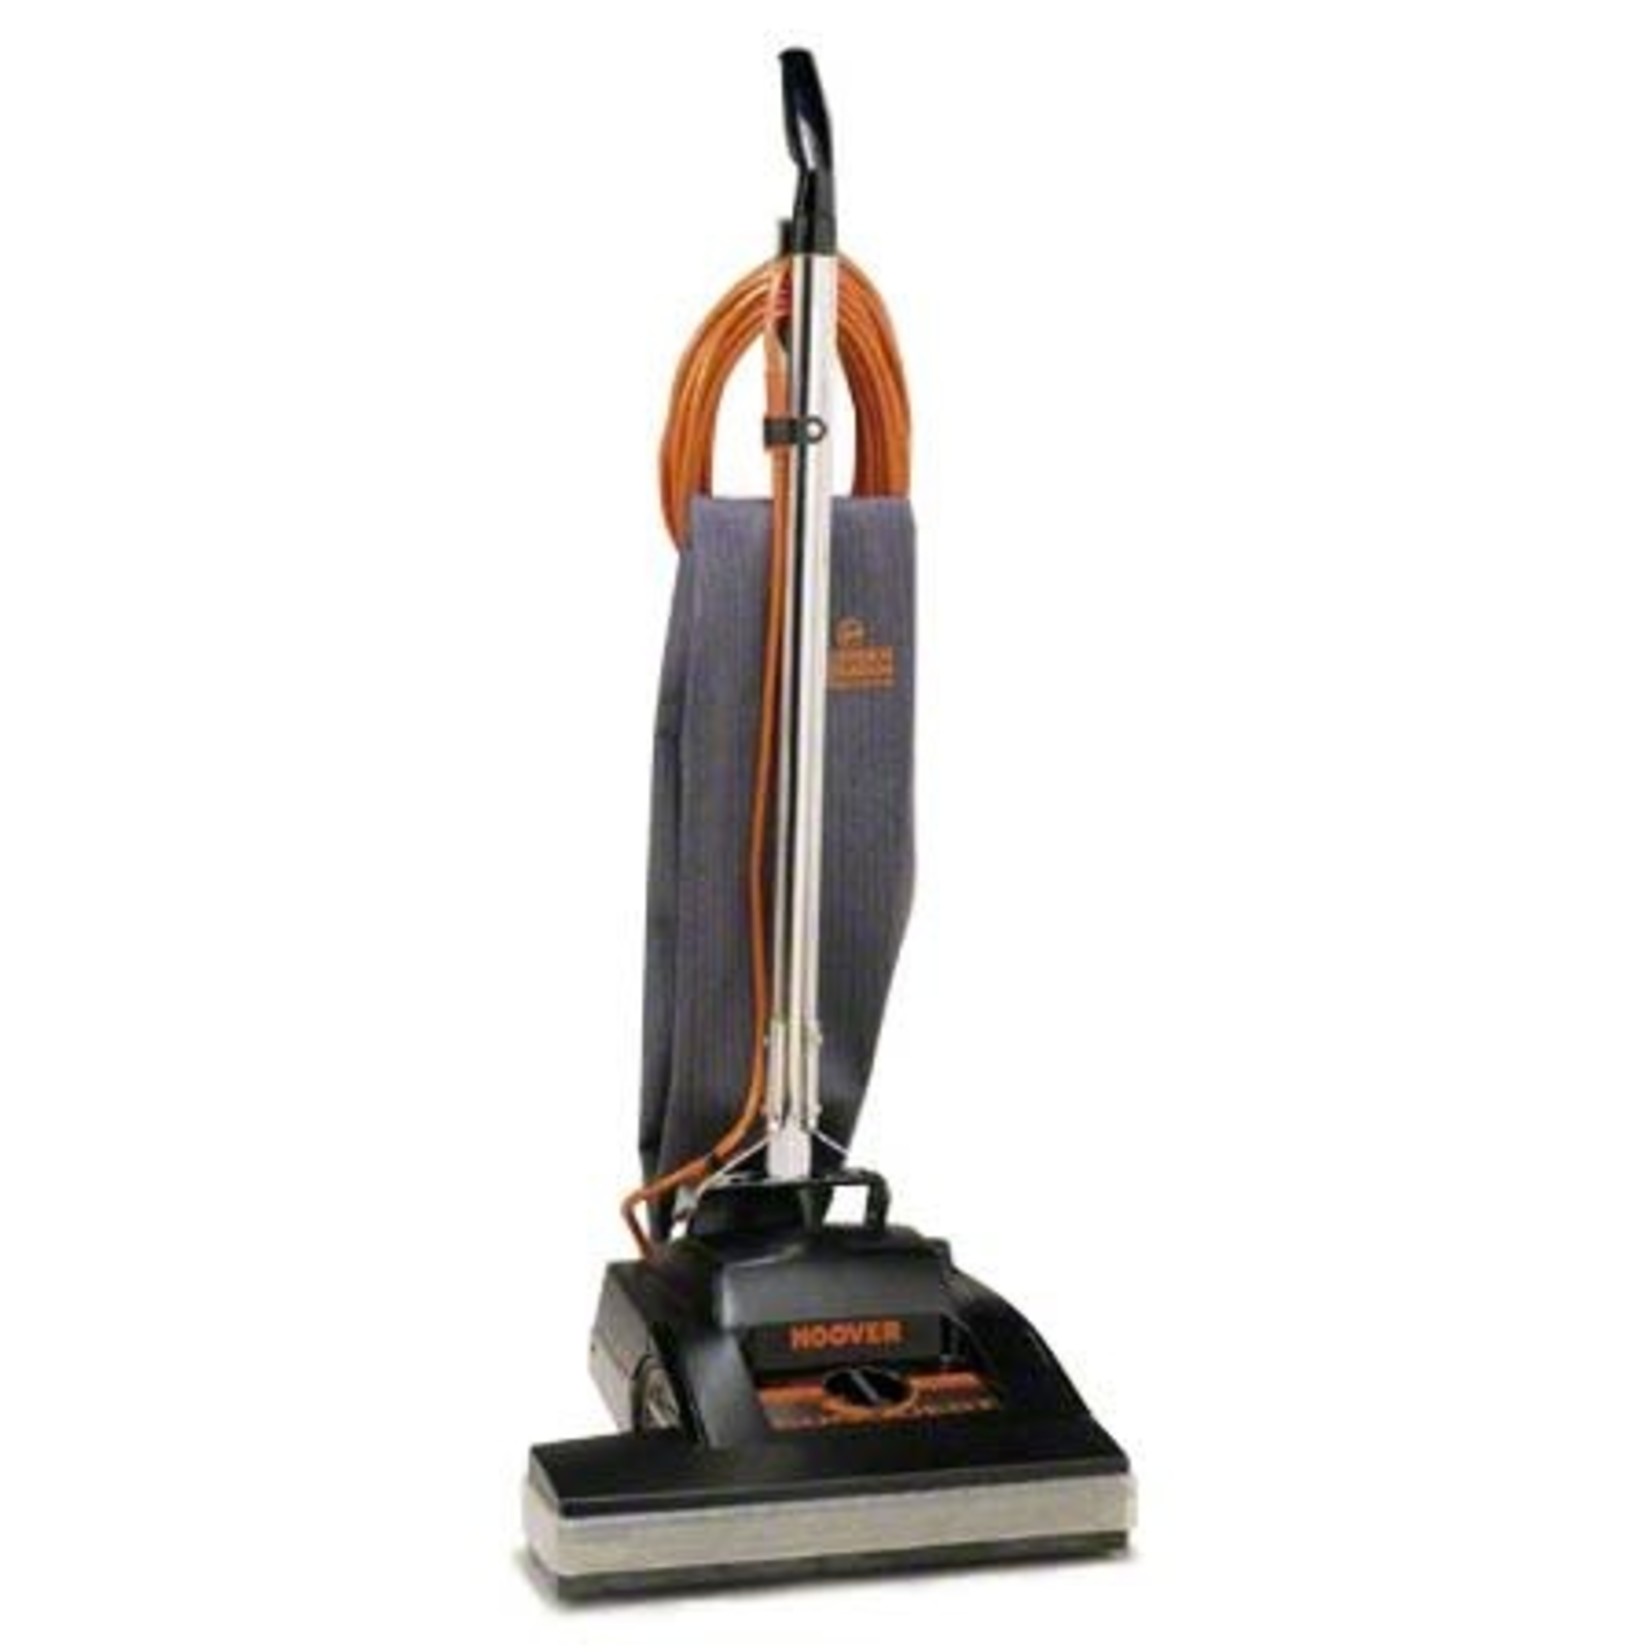 Hoover Hoover Upright 18" Conquest Model #C1810-020